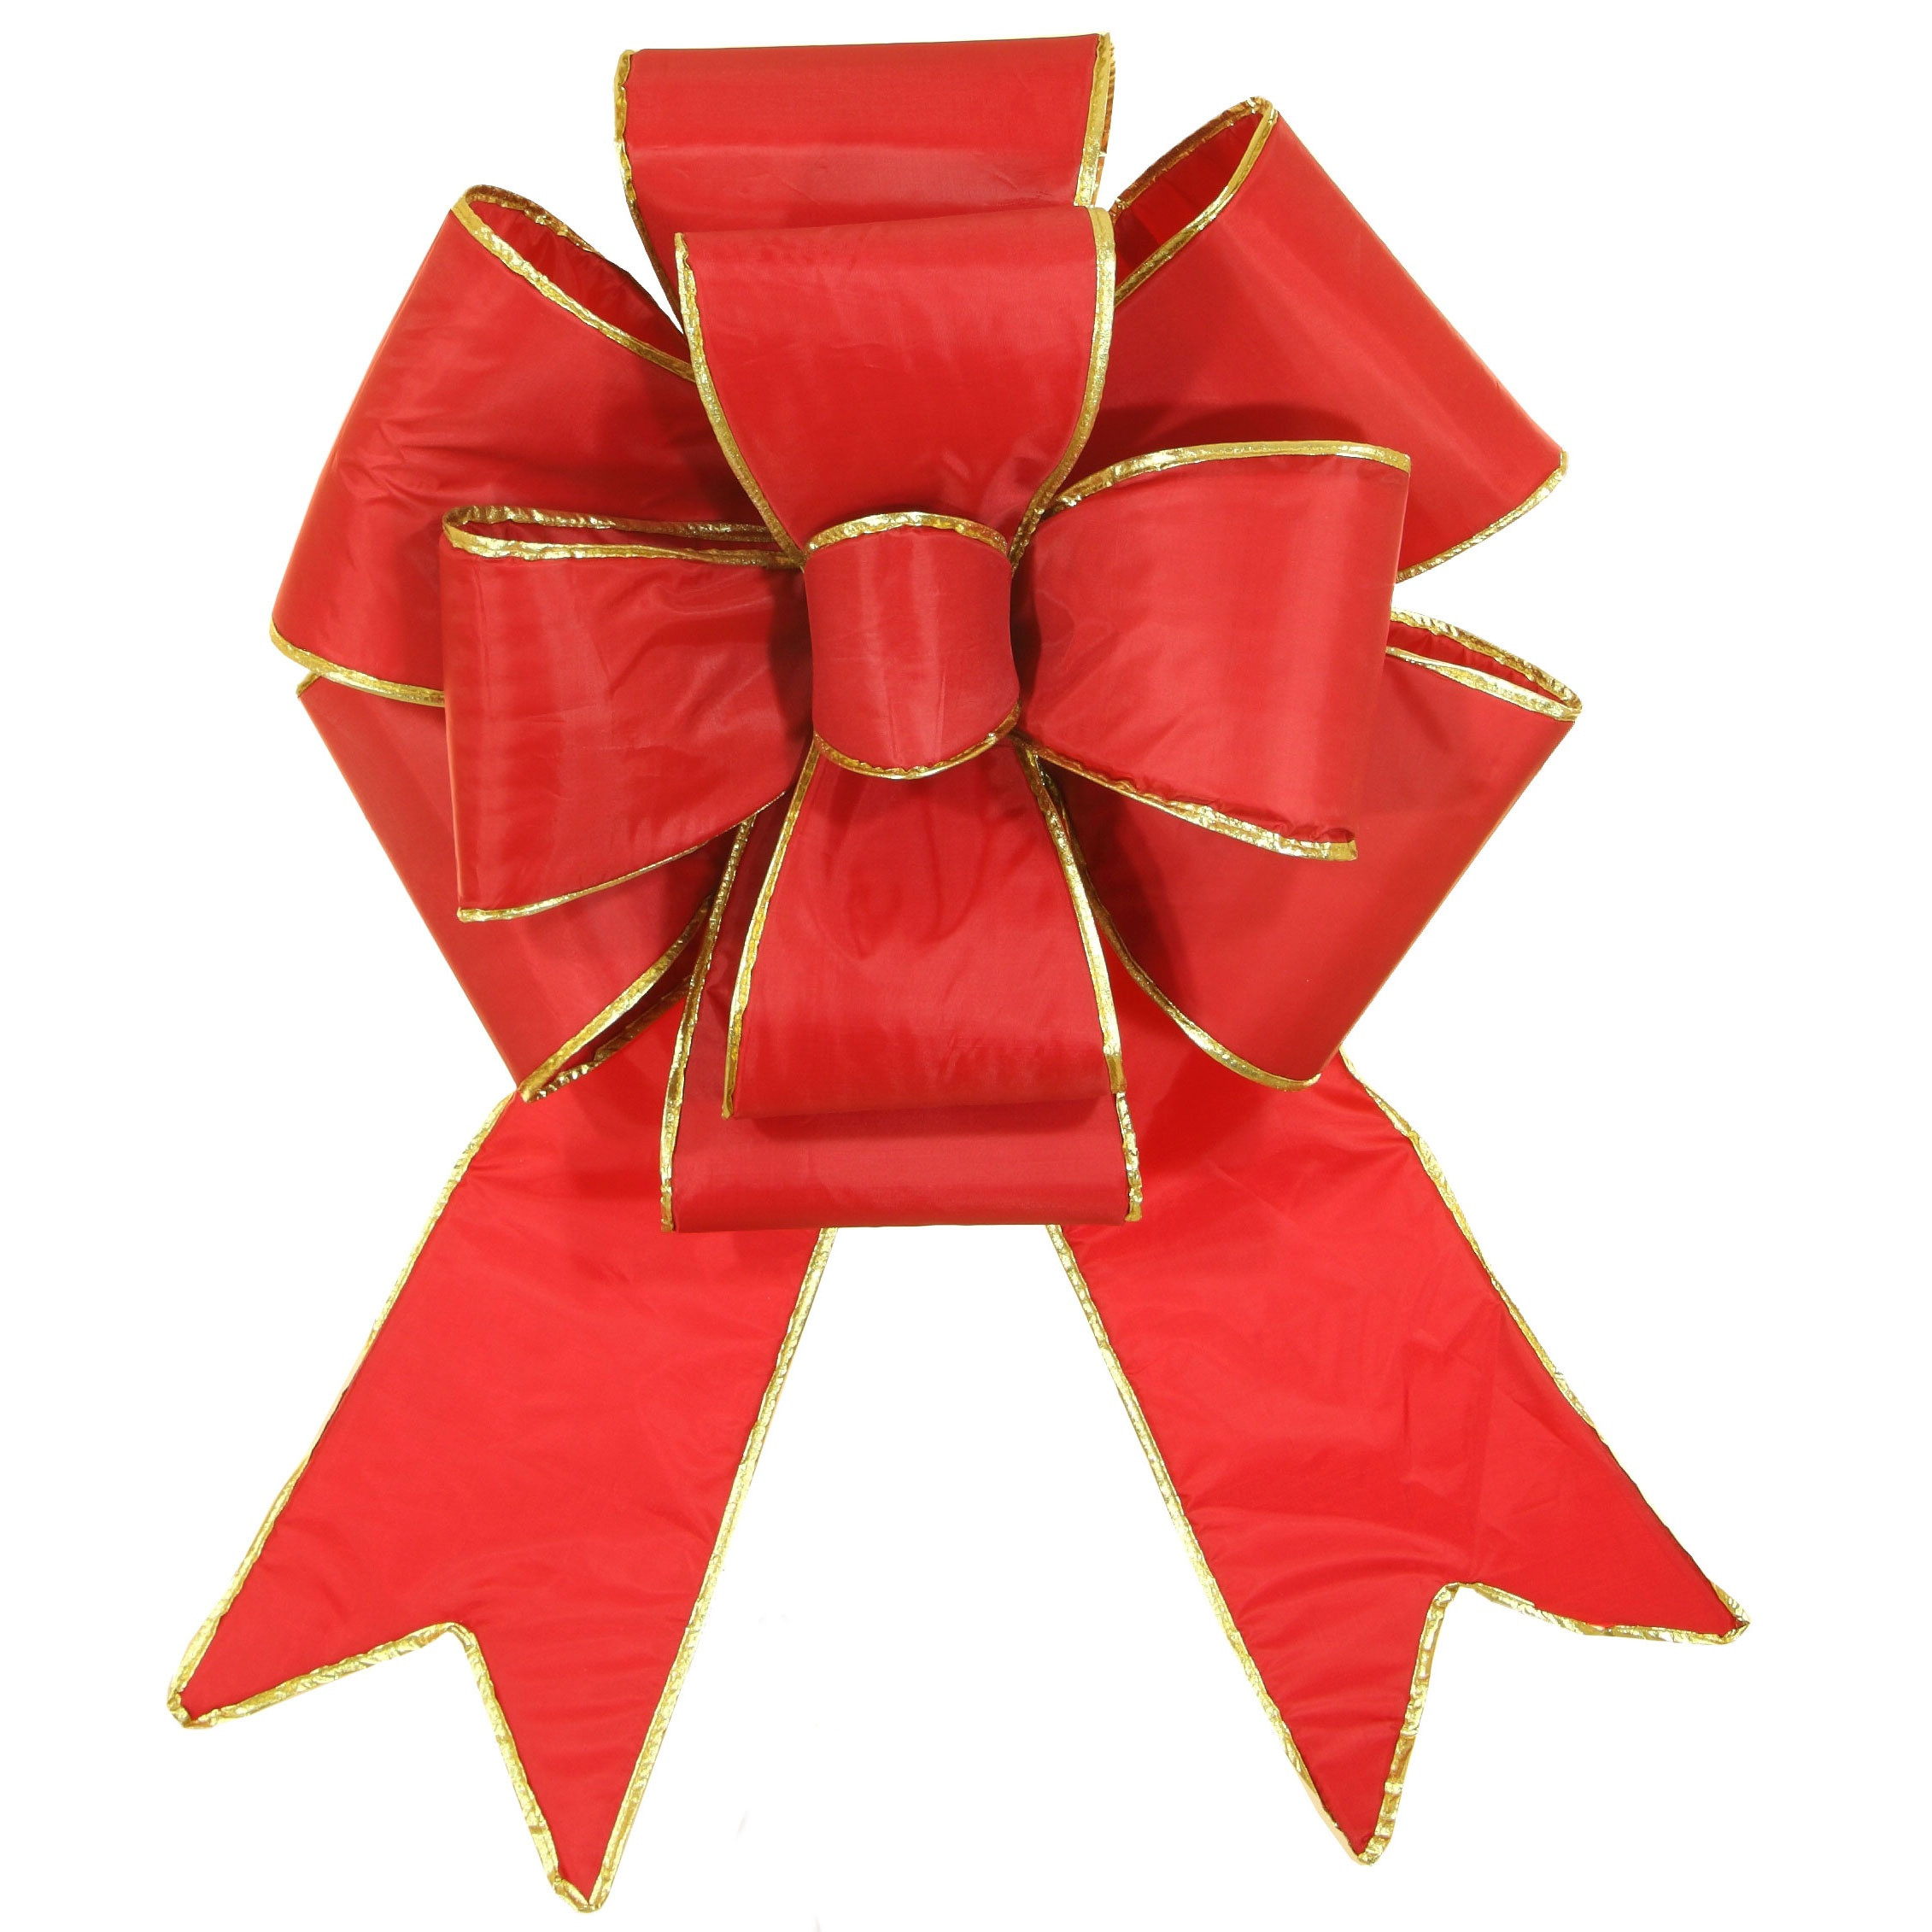 Outdoor Christmas Ribbon
 Outdoor Christmas Decorations